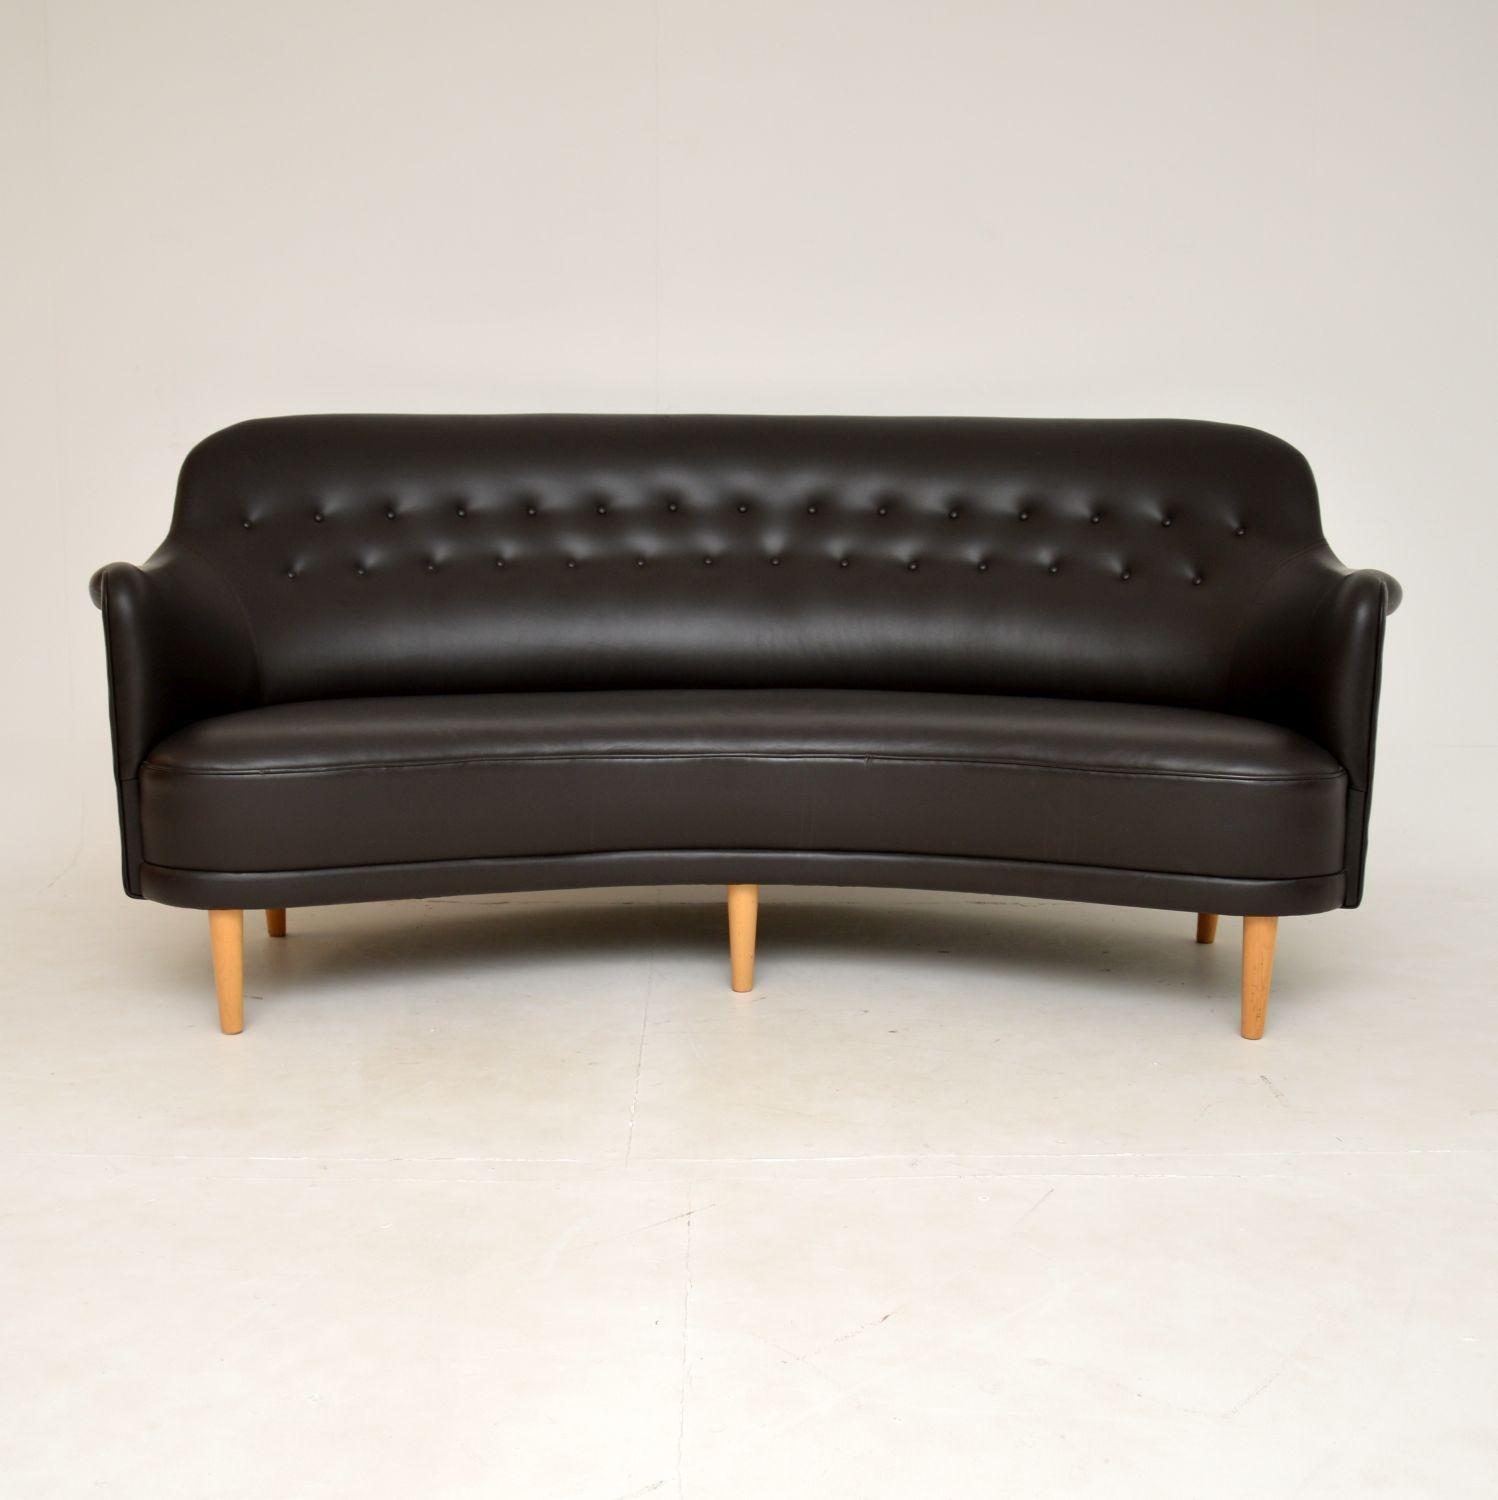 An absolutely stunning and iconic design, this is the Samsas Round sofa. It was designed by Carl Malmsten back in the 1920’s. This model was made in Sweden in the late 20th century by Sjogren.

It is fully upholstered in beautifully soft leather,